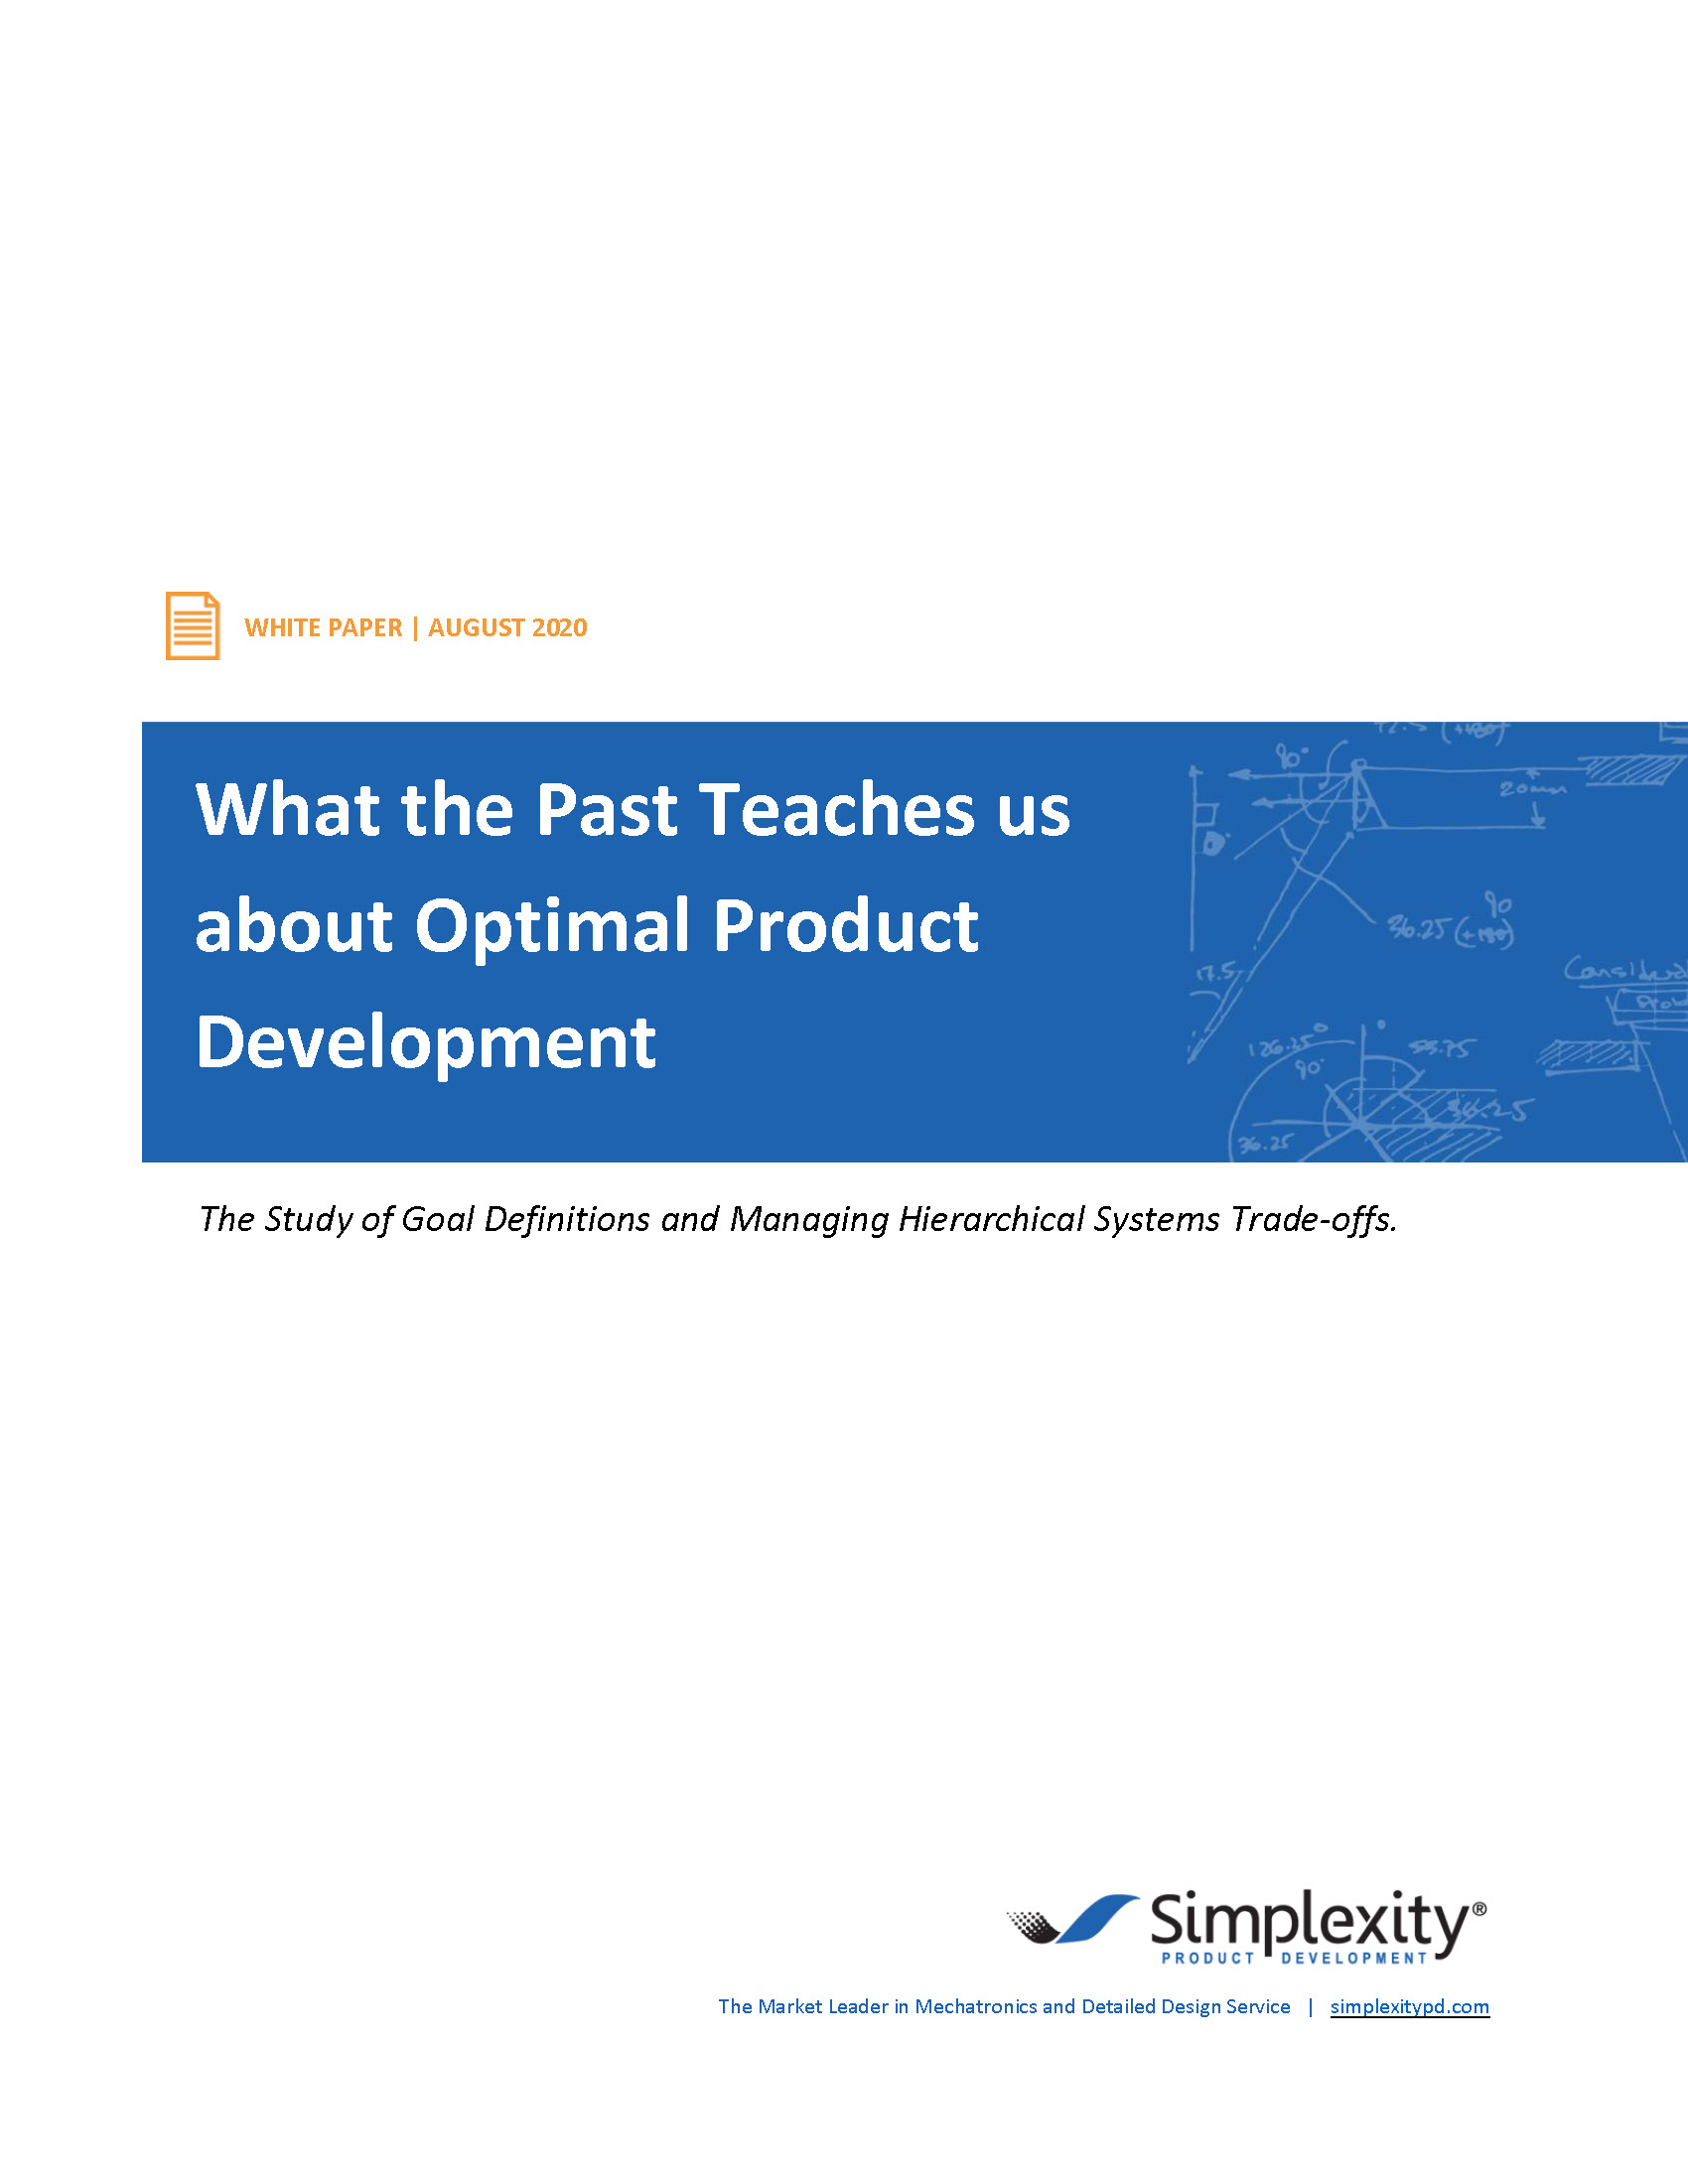 What the Past Teaches us about Product Development 2